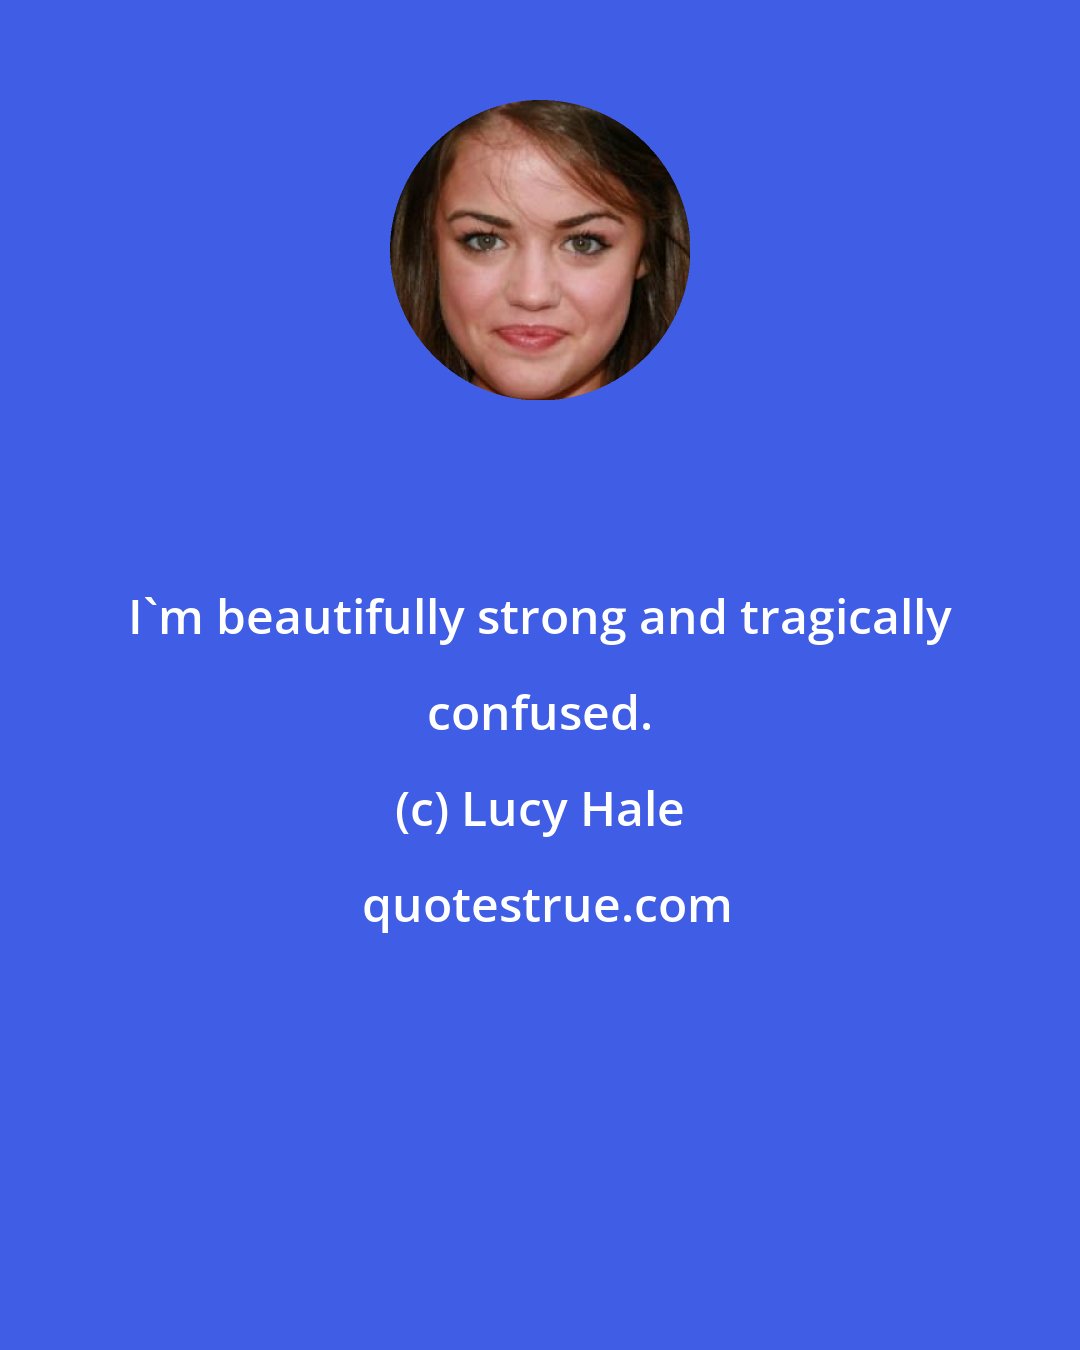 Lucy Hale: I'm beautifully strong and tragically confused.